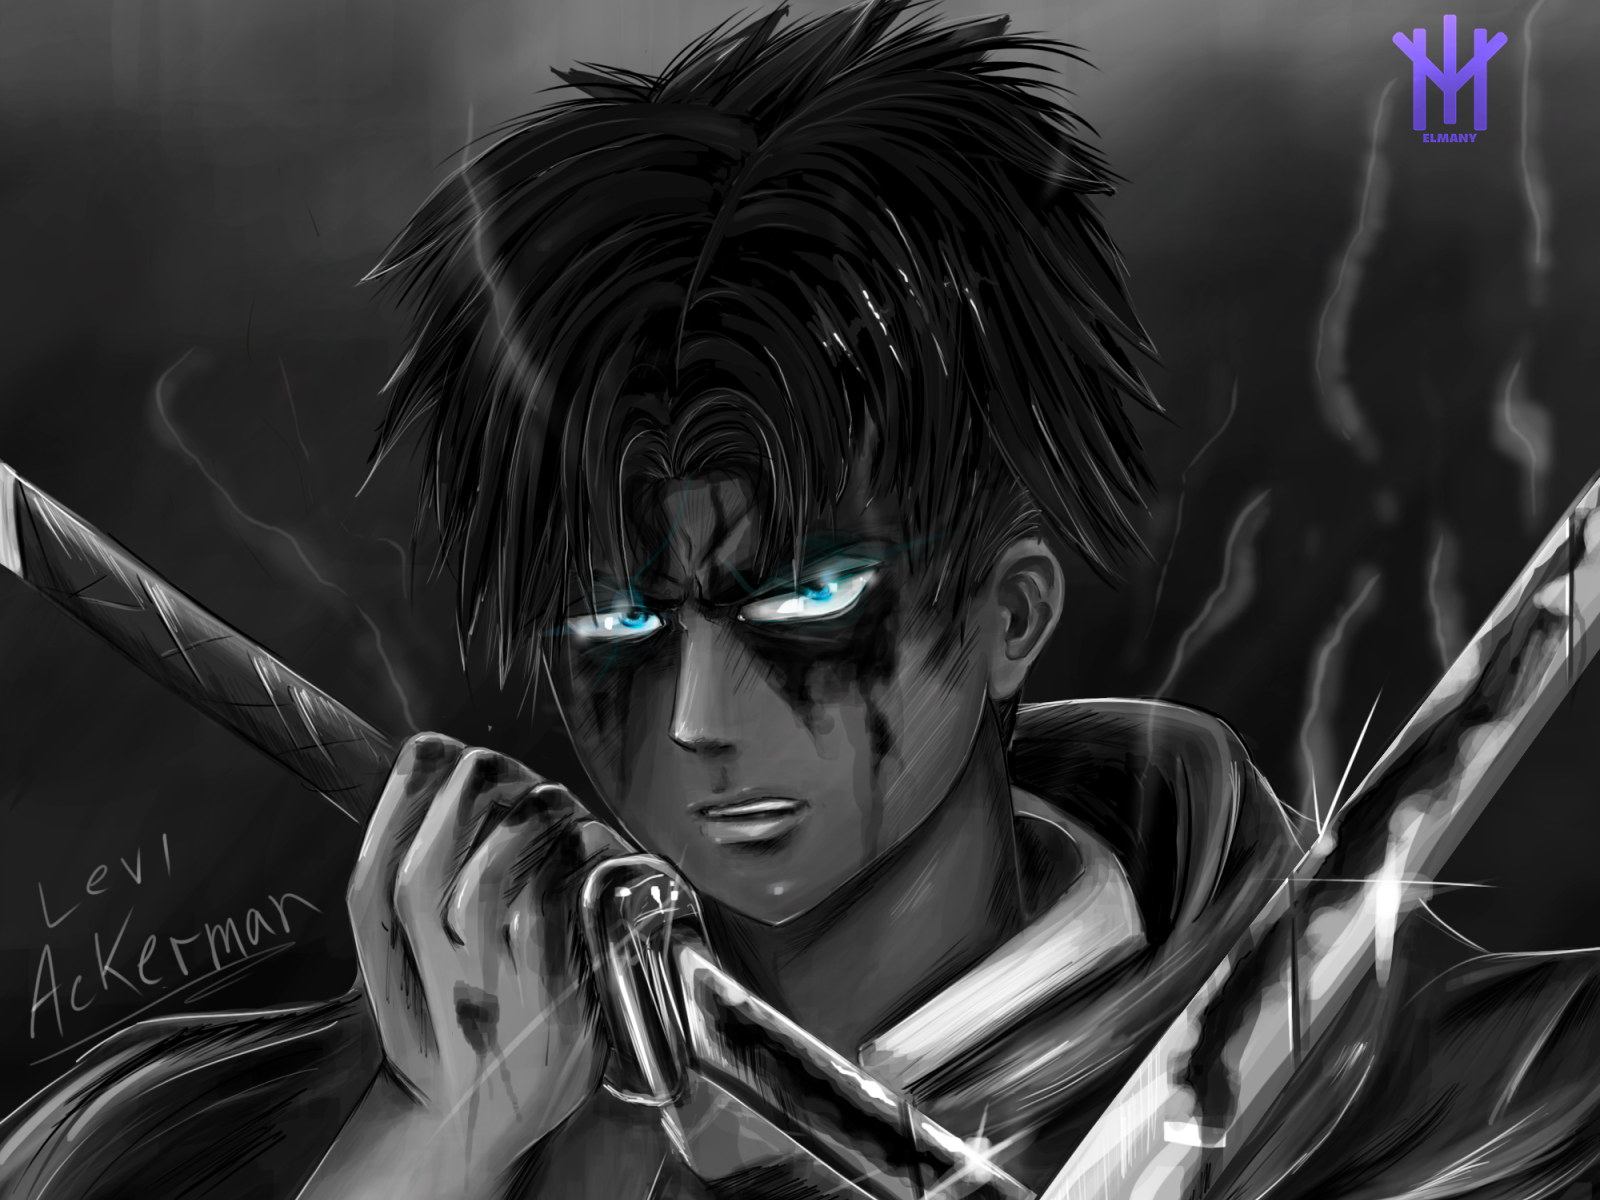 16 Drawings of Levi Ackerman from Attack on Titan  Beautiful Dawn Designs